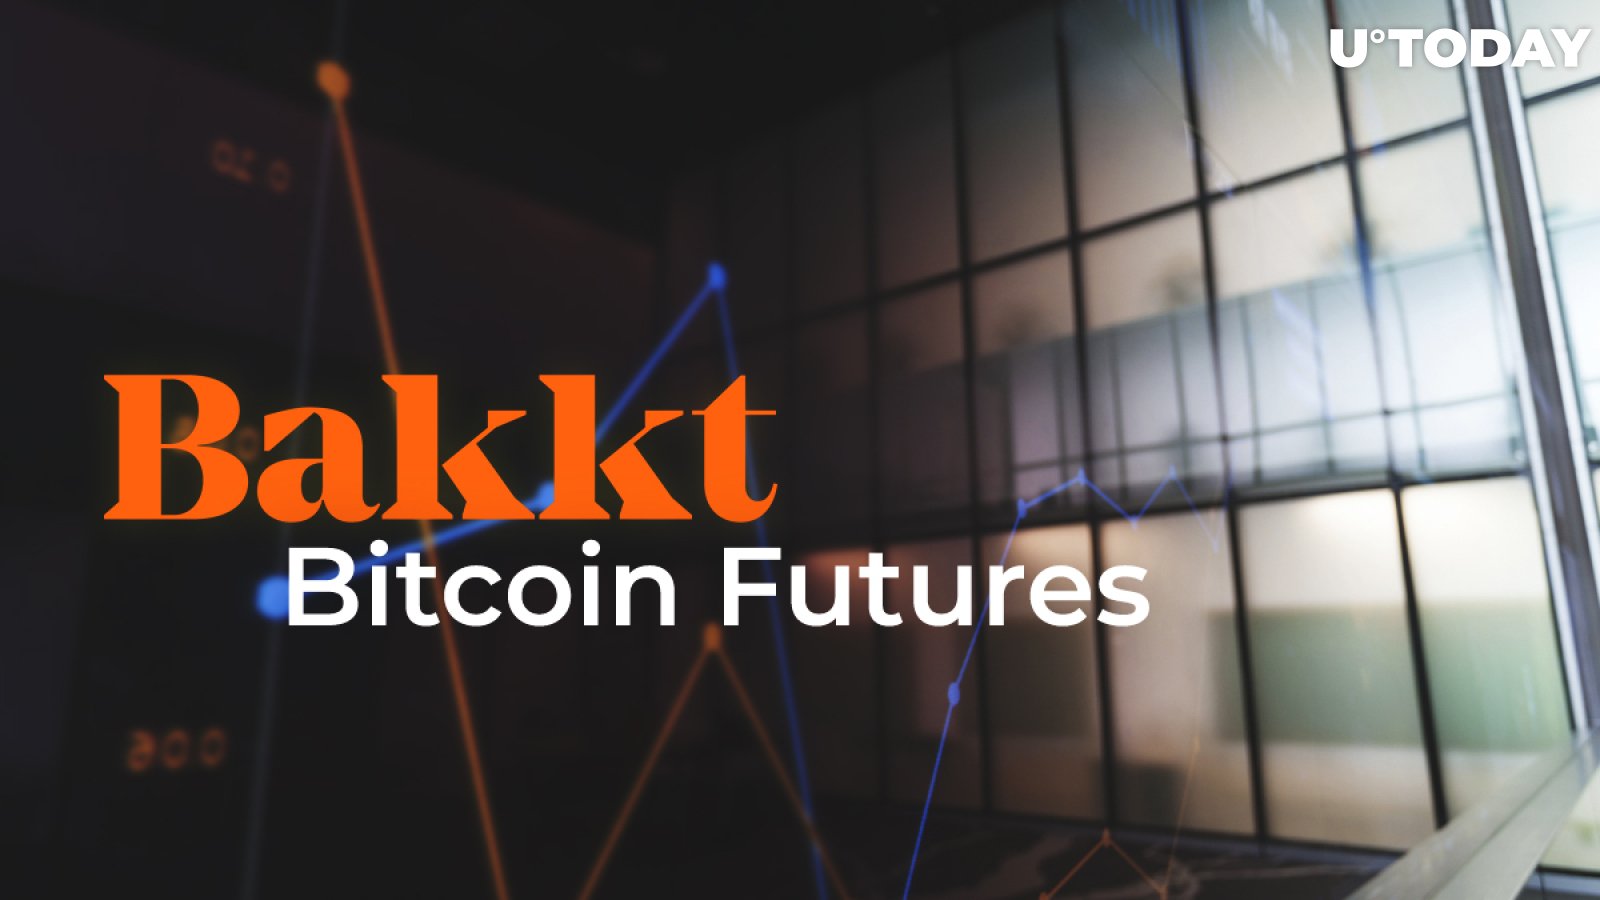 Bakkt Bitcoin Futures Set New Record with Close to $50 Mln Traded in One Day